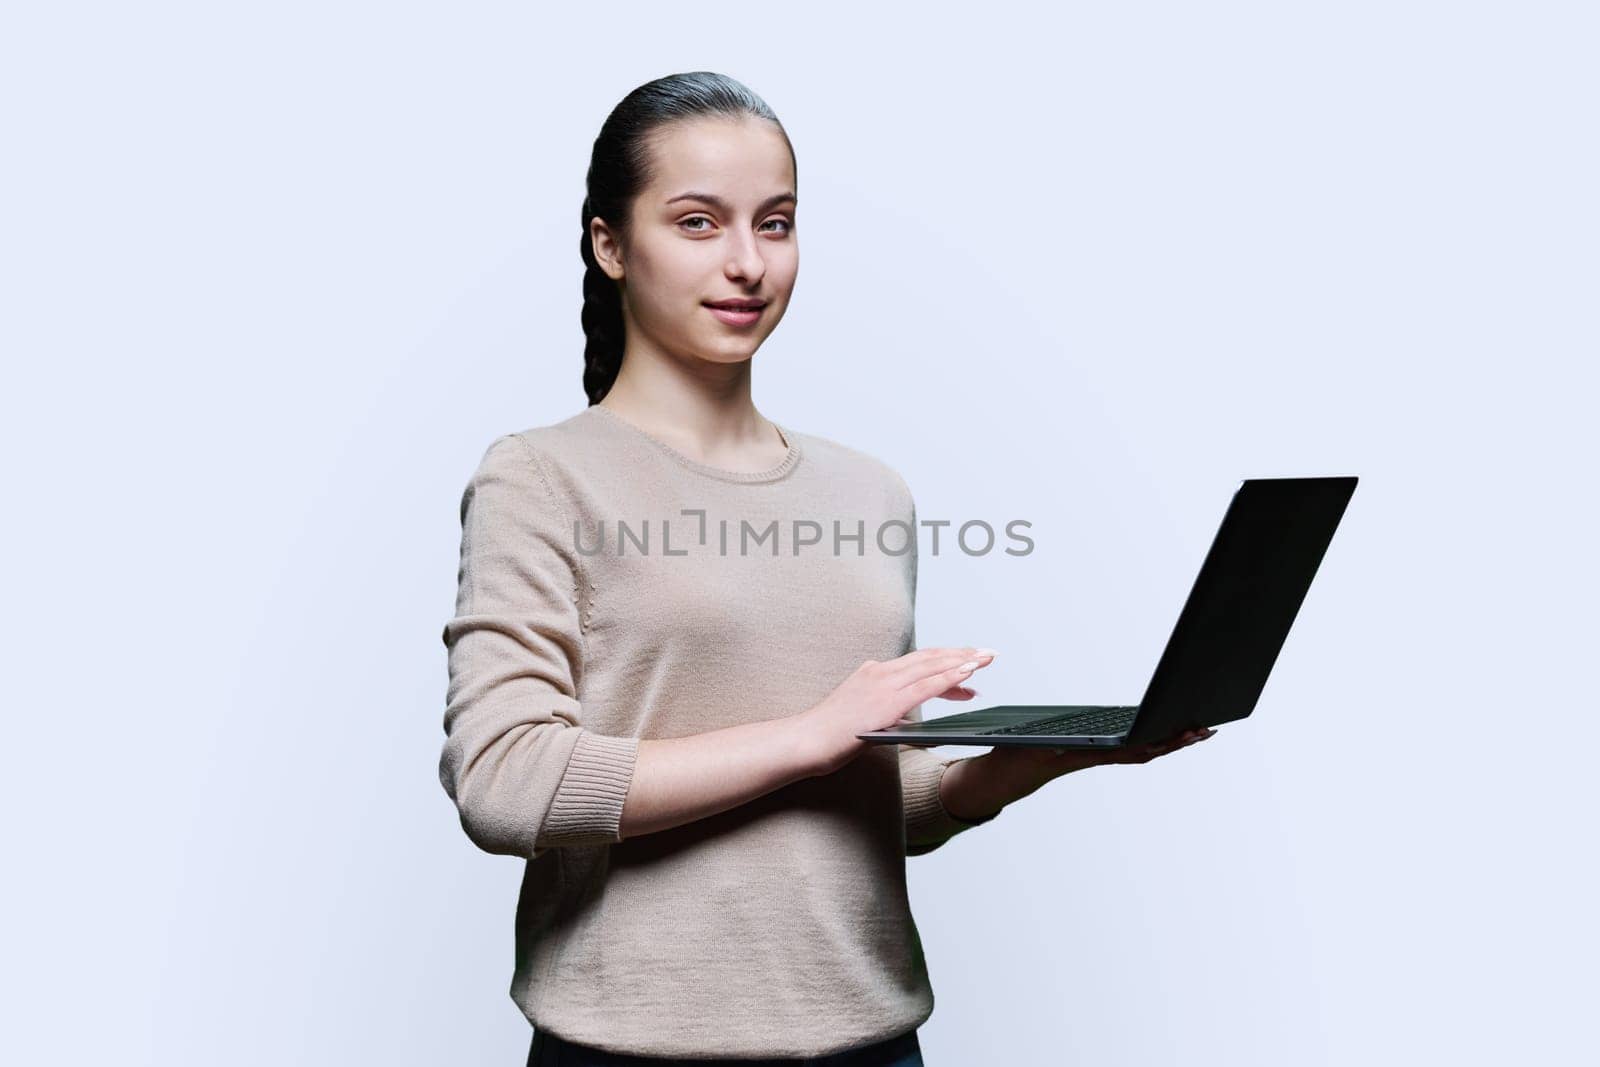 Teen girl high school student using laptop looking at camera on white studio background. Technology, e-learning, education, adolescence, youth concept.